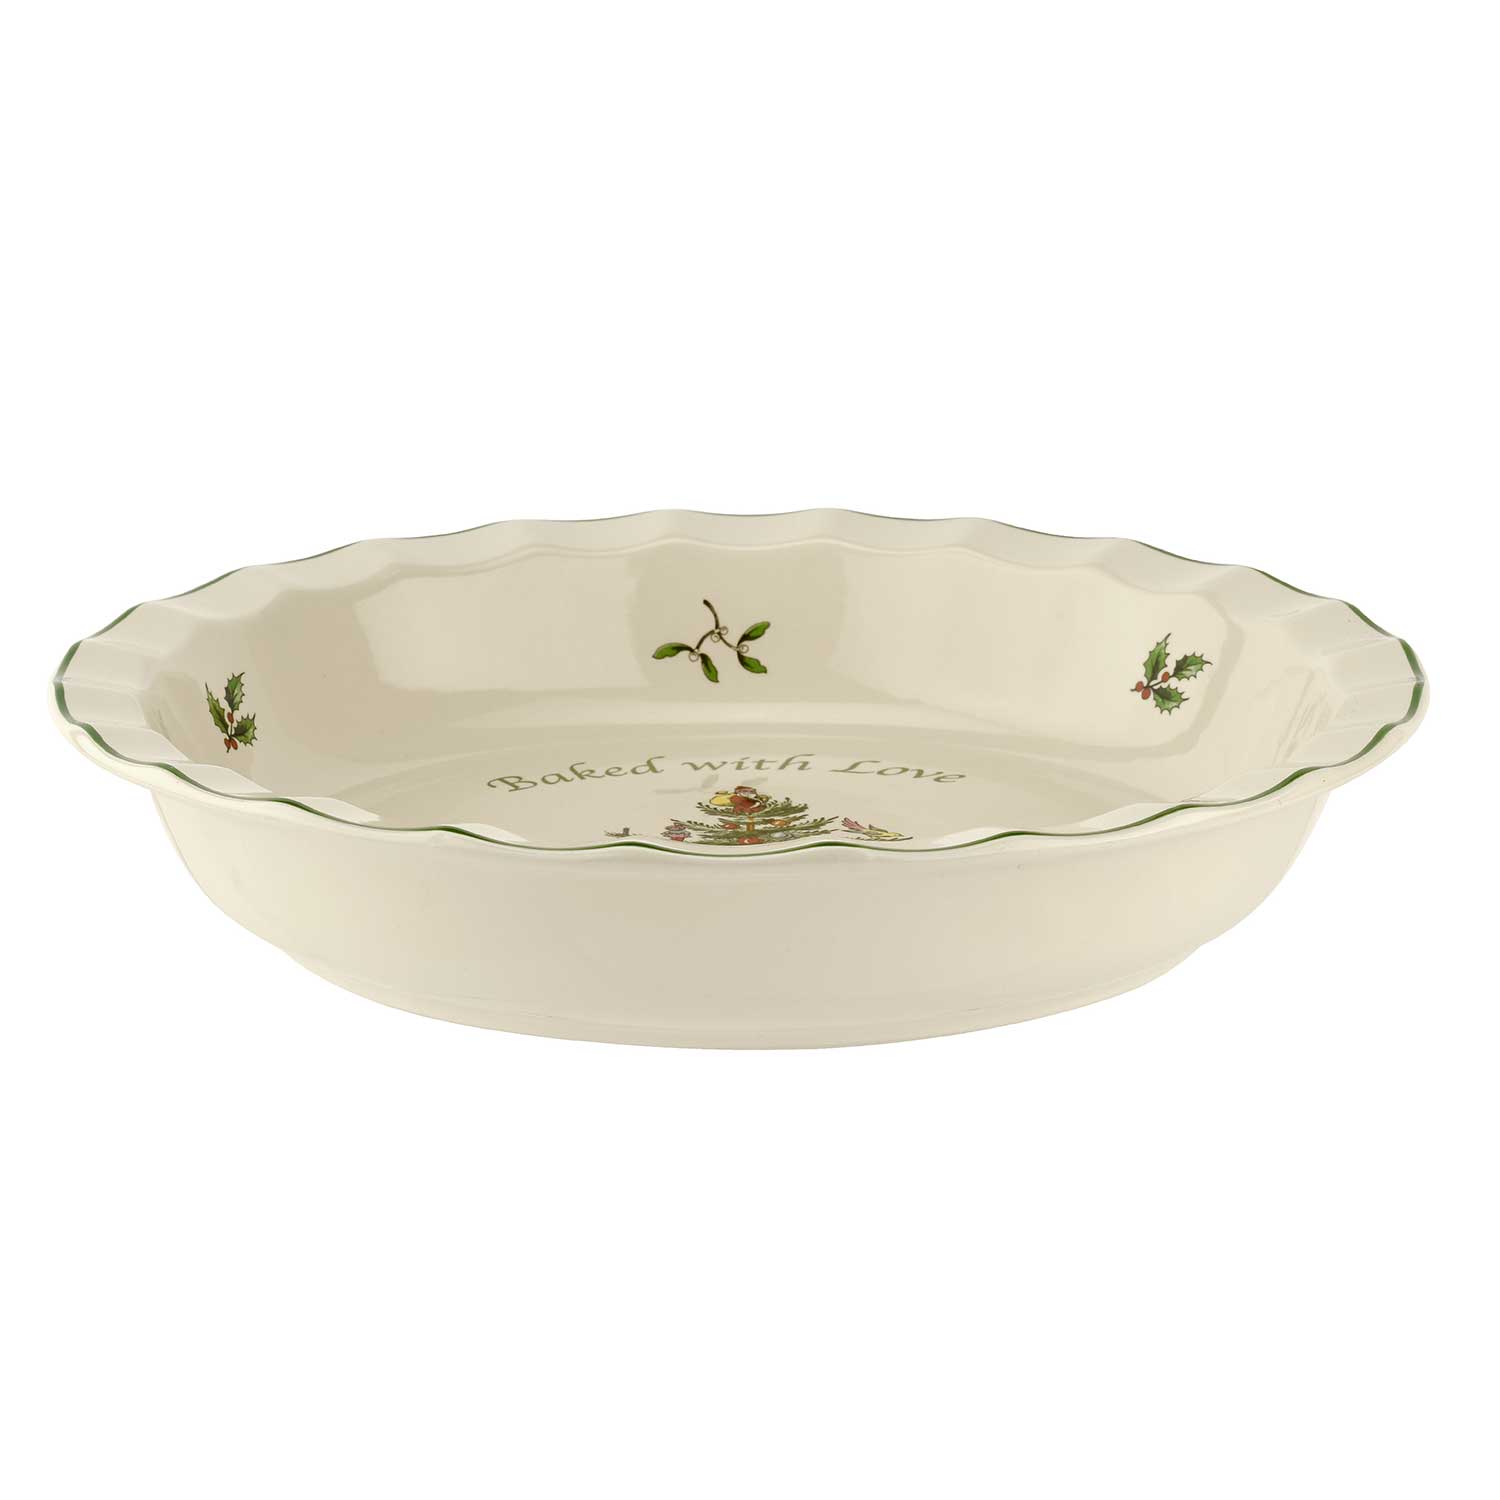 Spode Christmas Tree 10 Inch Pie Dish Baked with Love | Round Baking Dish  for Cake, Pie, and Dessert | Made of Earthenware | Dishwasher, Microwave